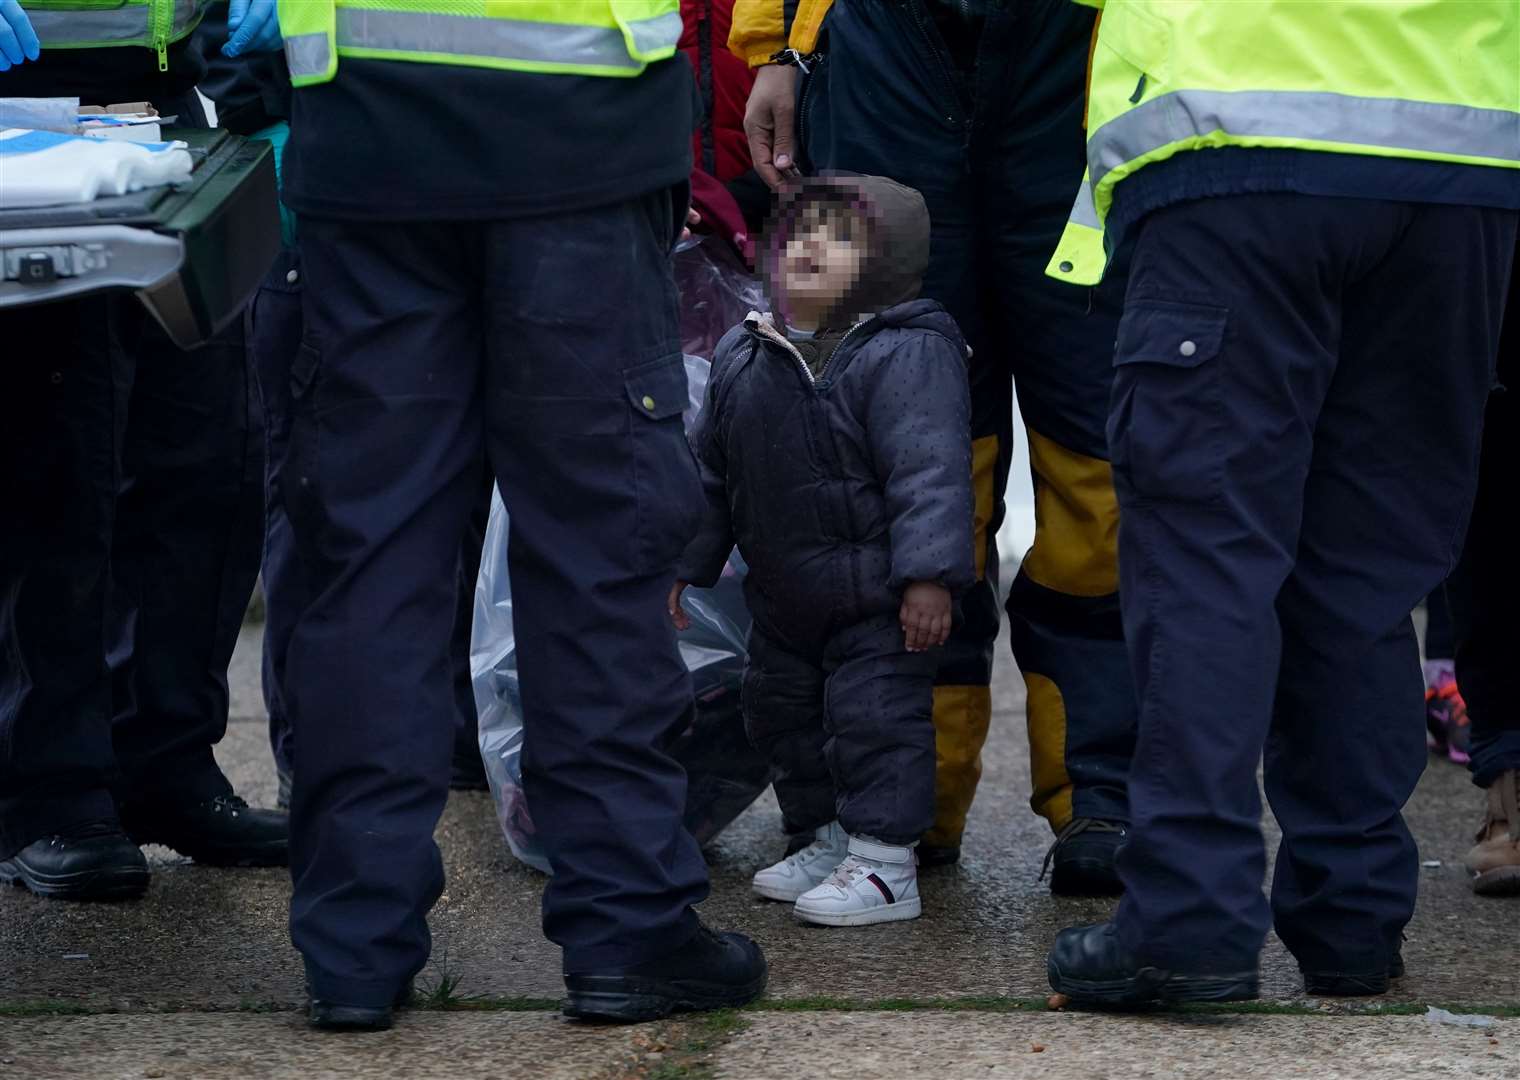 Young children are among those to have made the dangerous crossing this weekend (Gareth Fuller/PA)